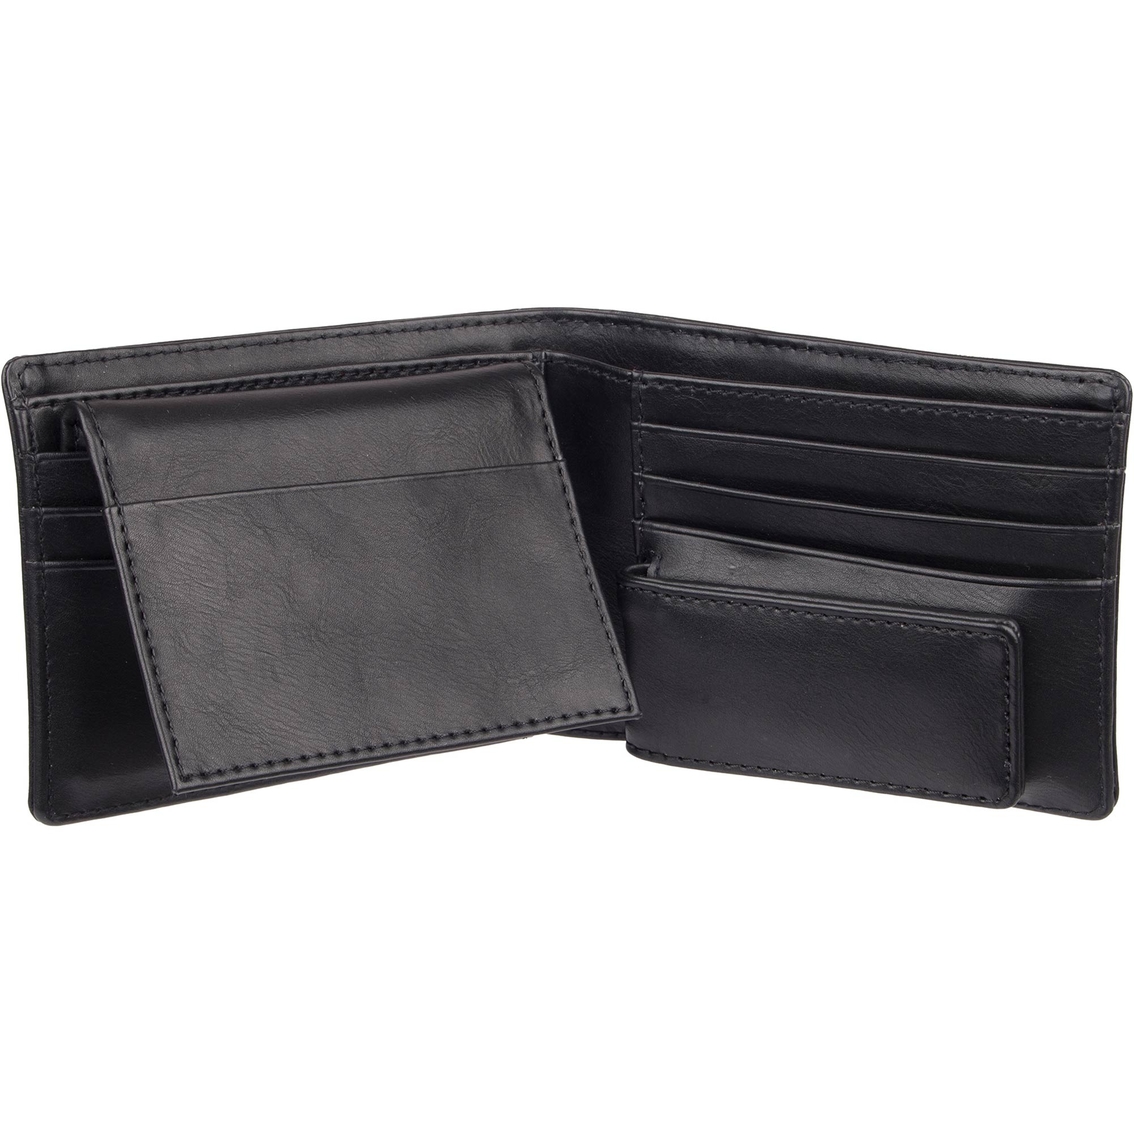 Exact Fit Men's Rfid Stretch Extra Capacity Wallet With Money Clip ...